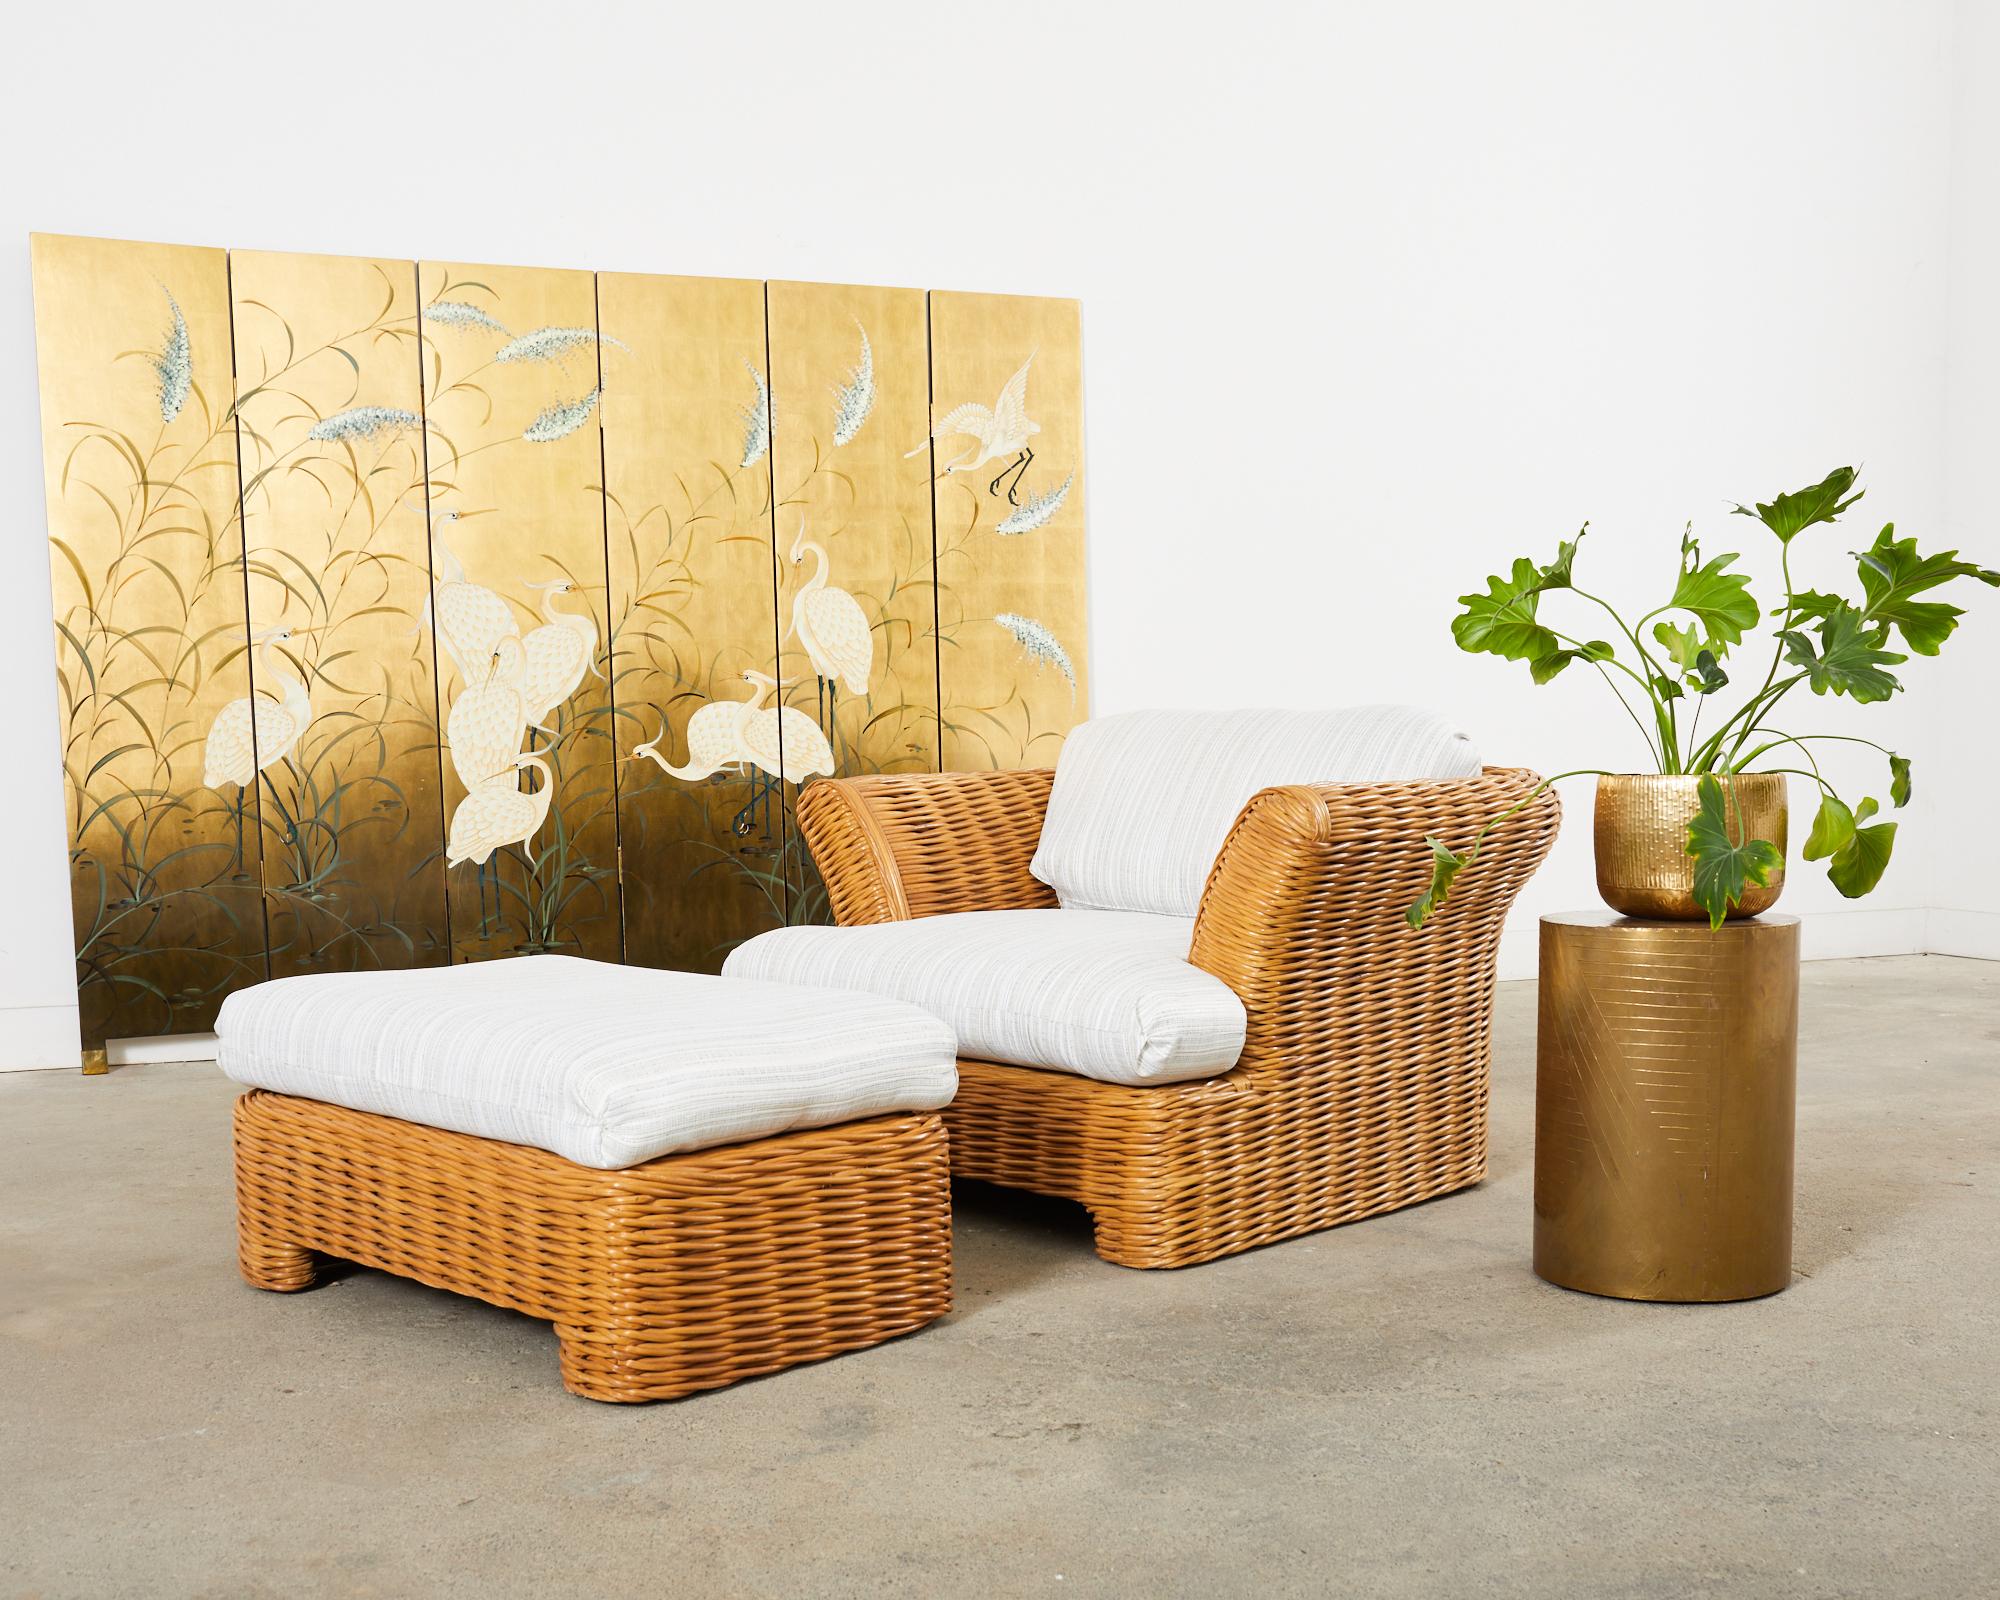 Opulent Chinese export six-panel lacquered screen featuring nine white cranes over a gilt gold leaf background. The idyllic landscape screen has gracefully waving fronds with delicate, and intricate details. The lacquered panels have a dramatic high